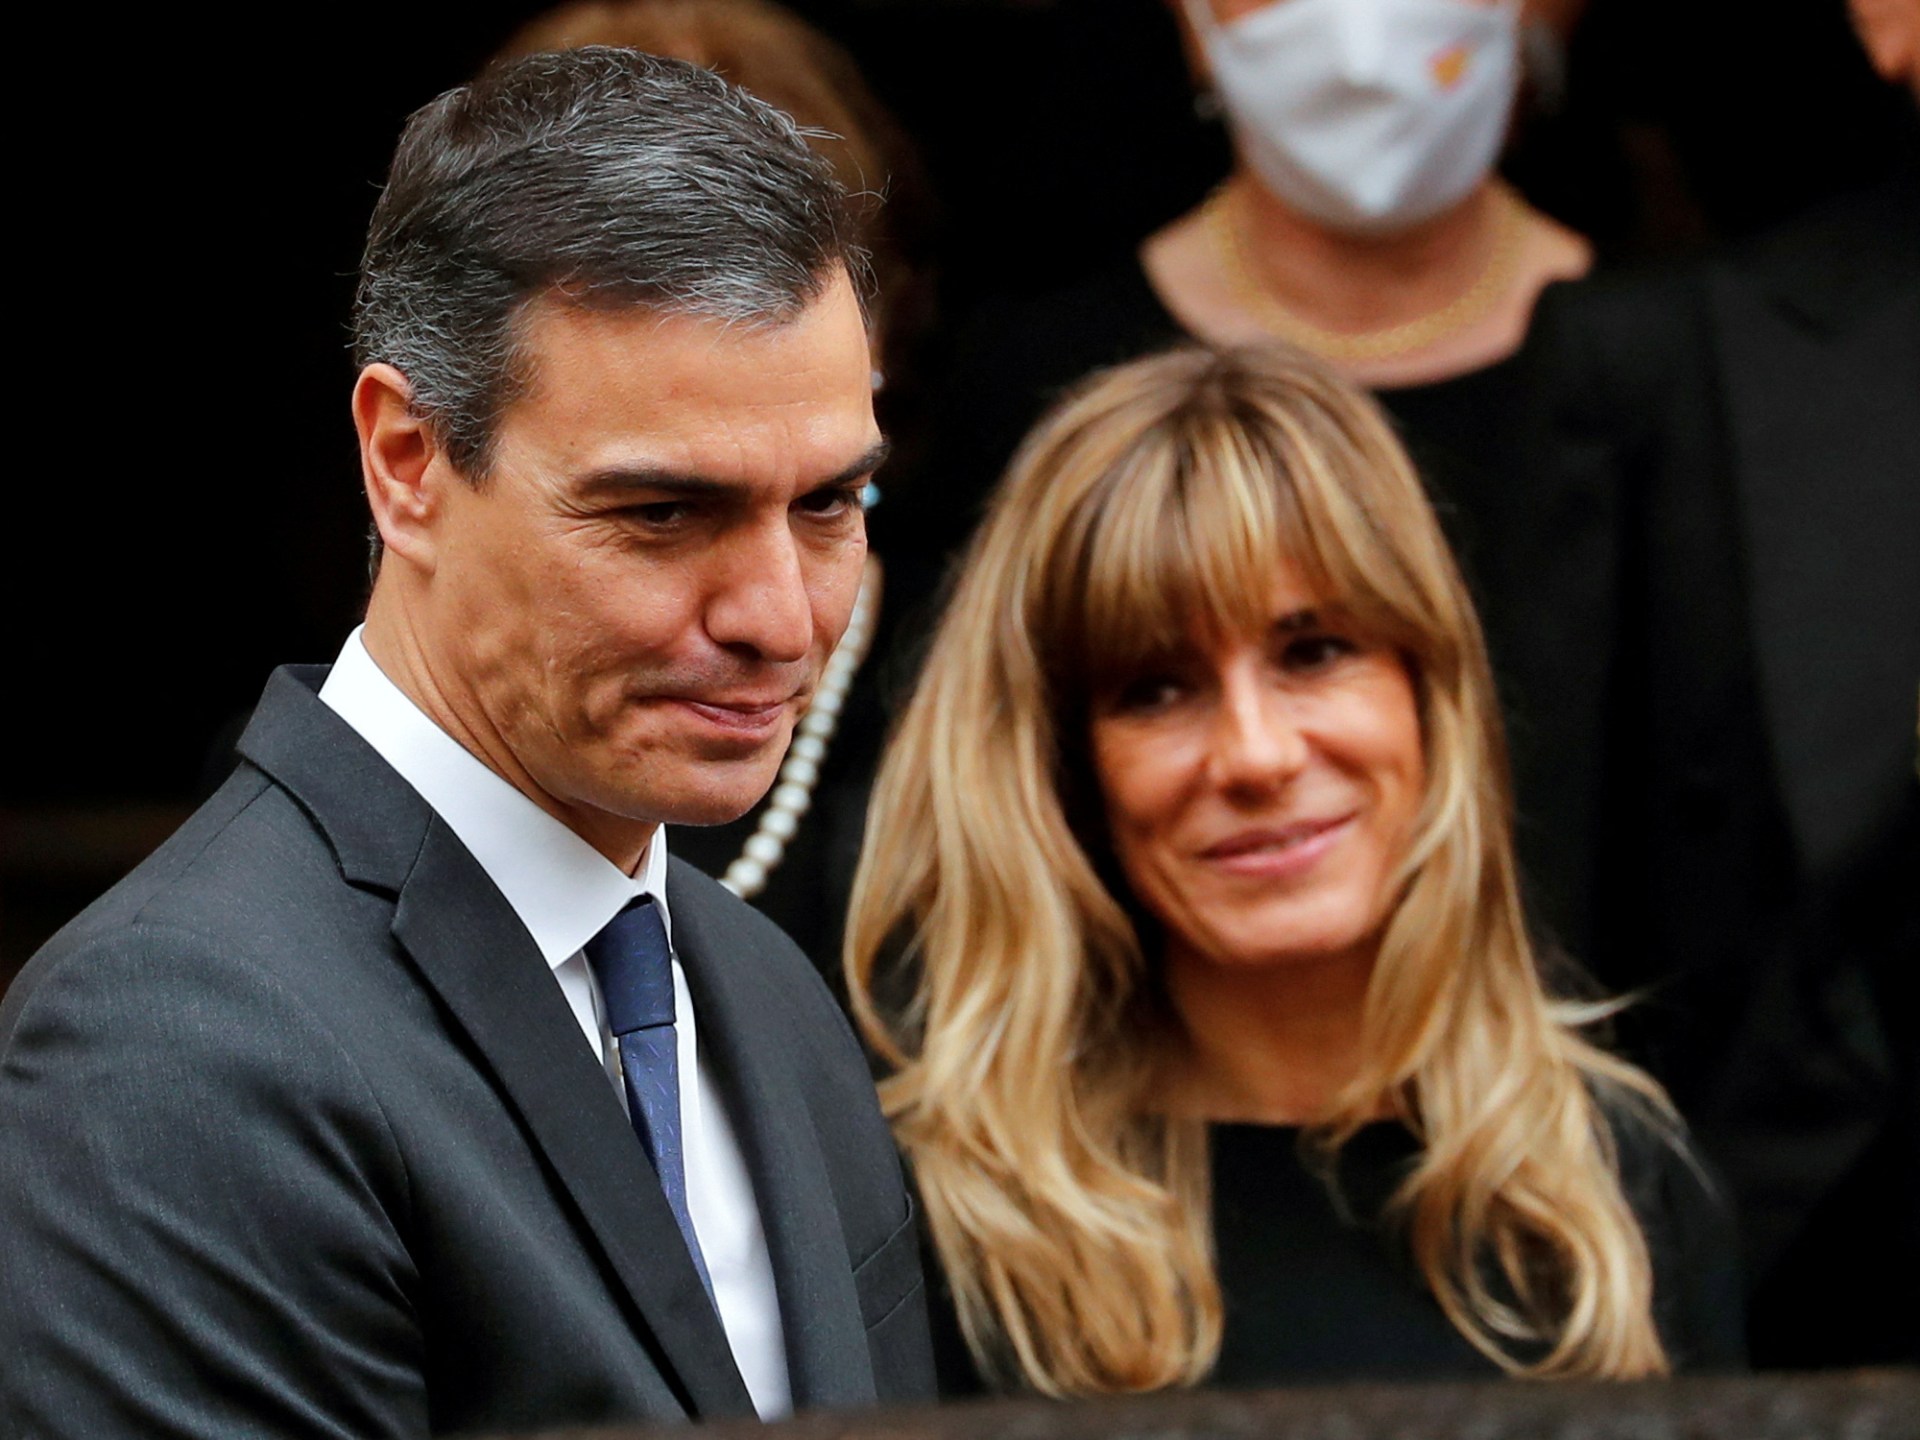 Spain’s prime minister halts public duties after wife accused of corruption | News